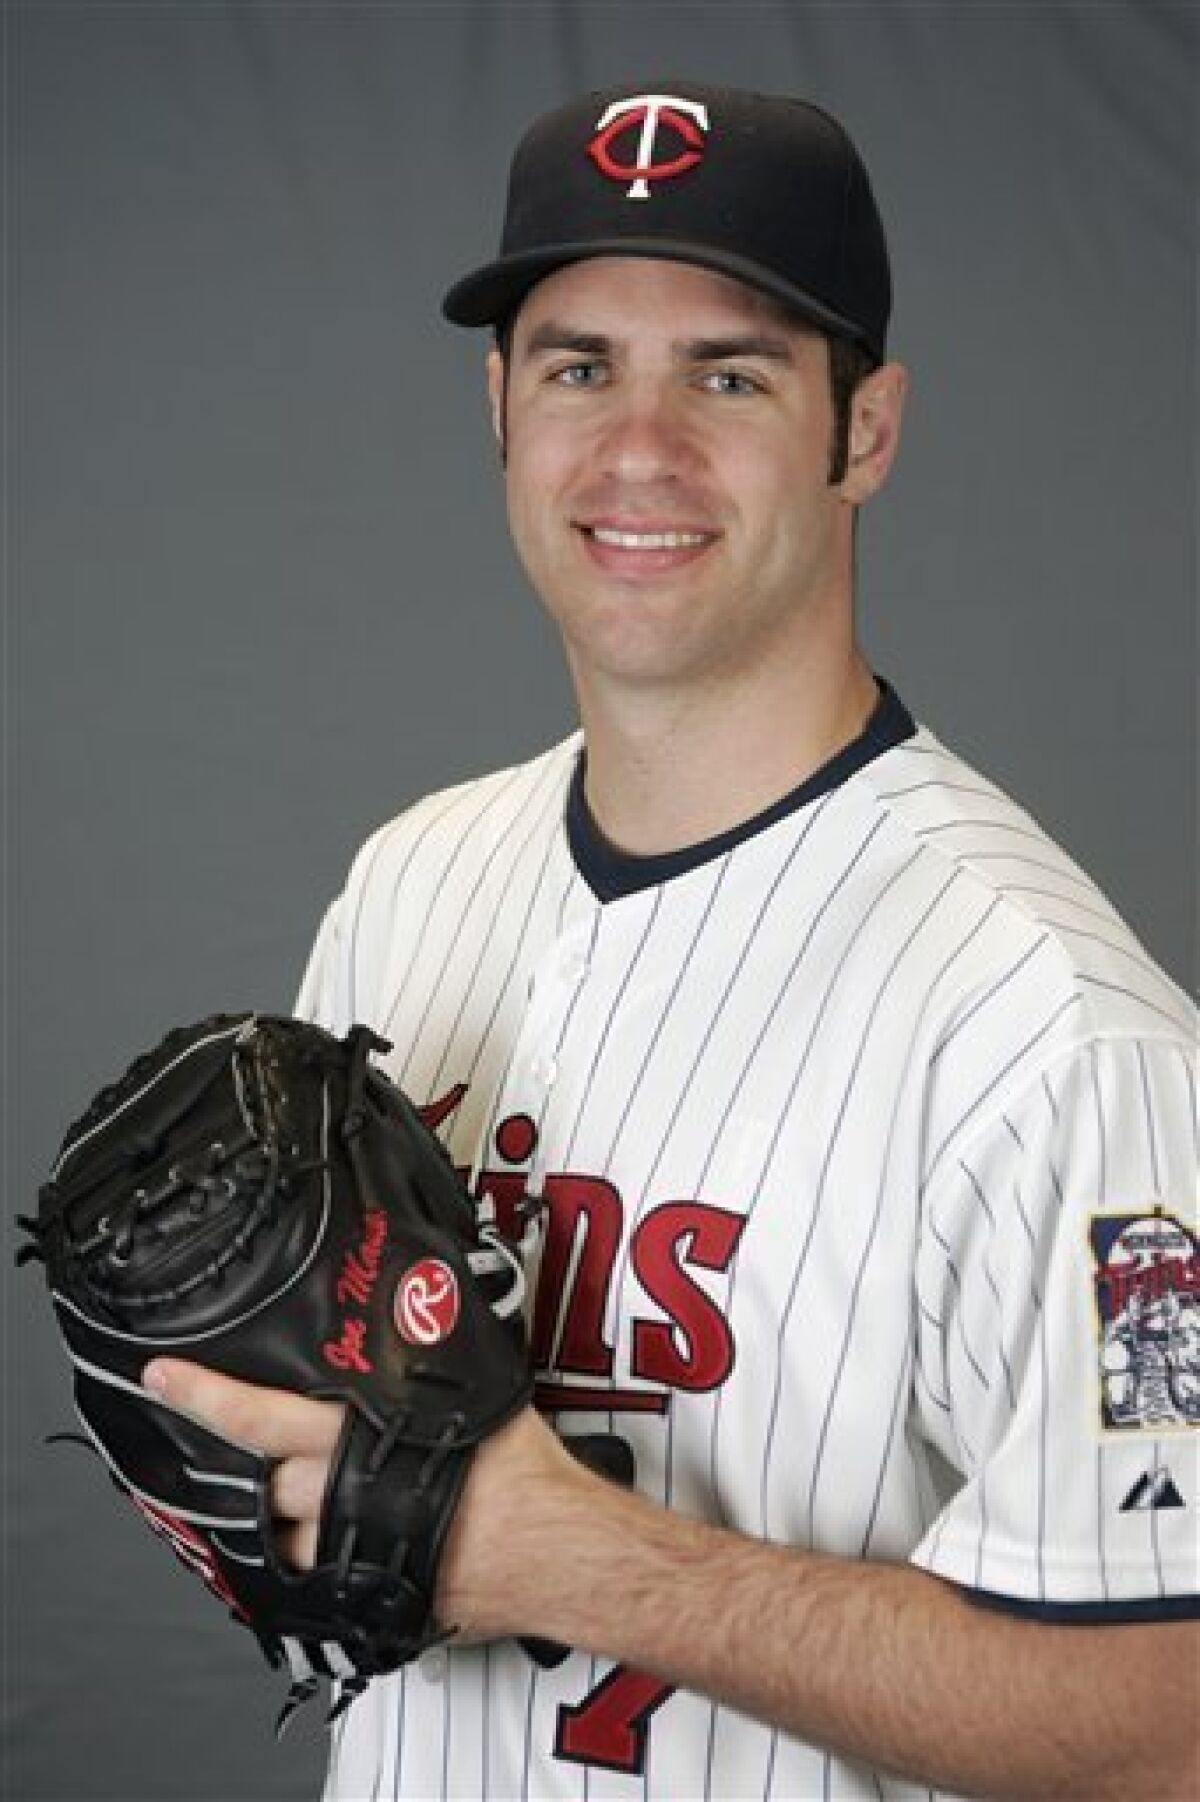 FILE - This is a 2009 file photo showing Minnesota Twins baseball player Joe Mauer. Mauer has become only the second catcher in 33 years to win the American League Most Valuable Player Award, Monday, Nov. 23, 2009. (AP Photo/Steve Senne, File)